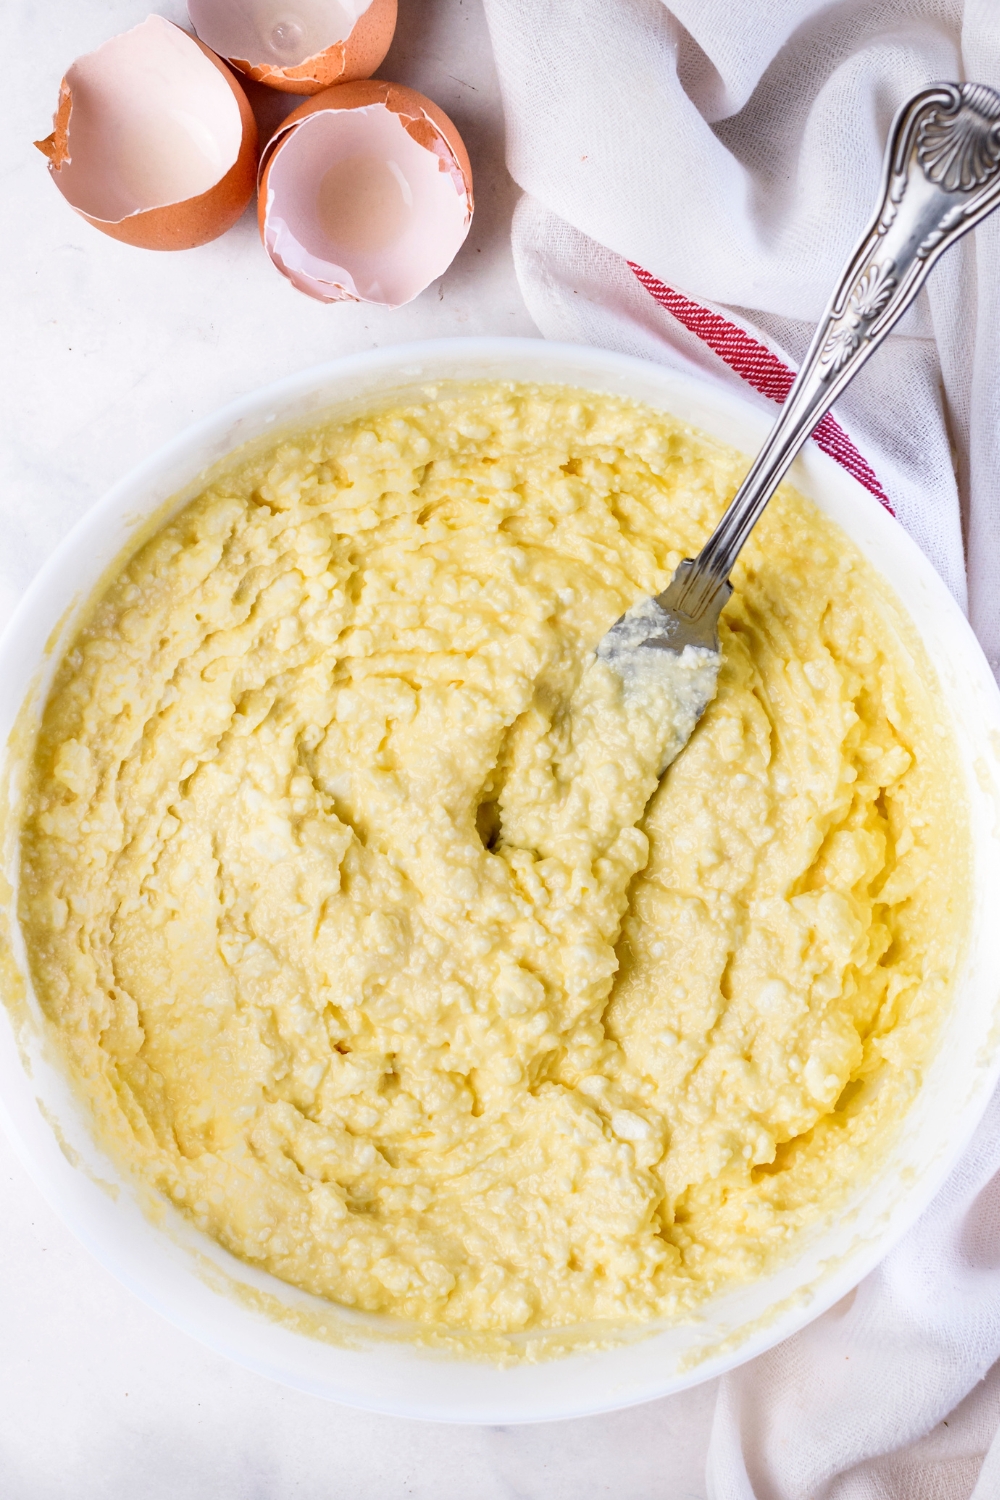 A mixing bowl with baked ricotta mixture.